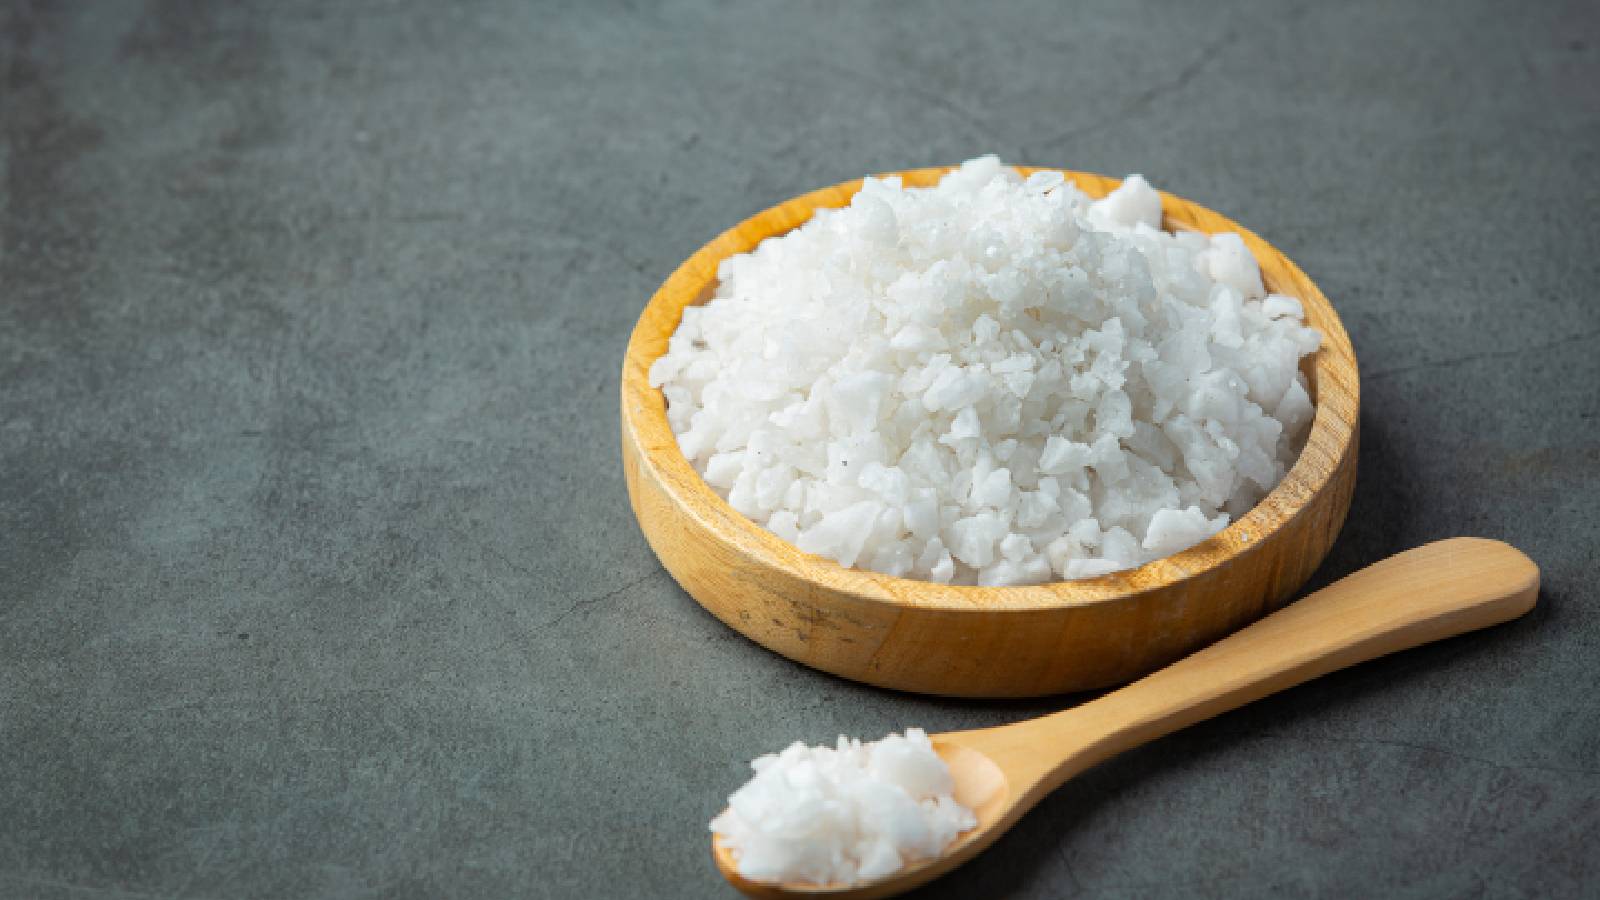 Epsom salt has benefits for diet, skin and hair! Know all about it